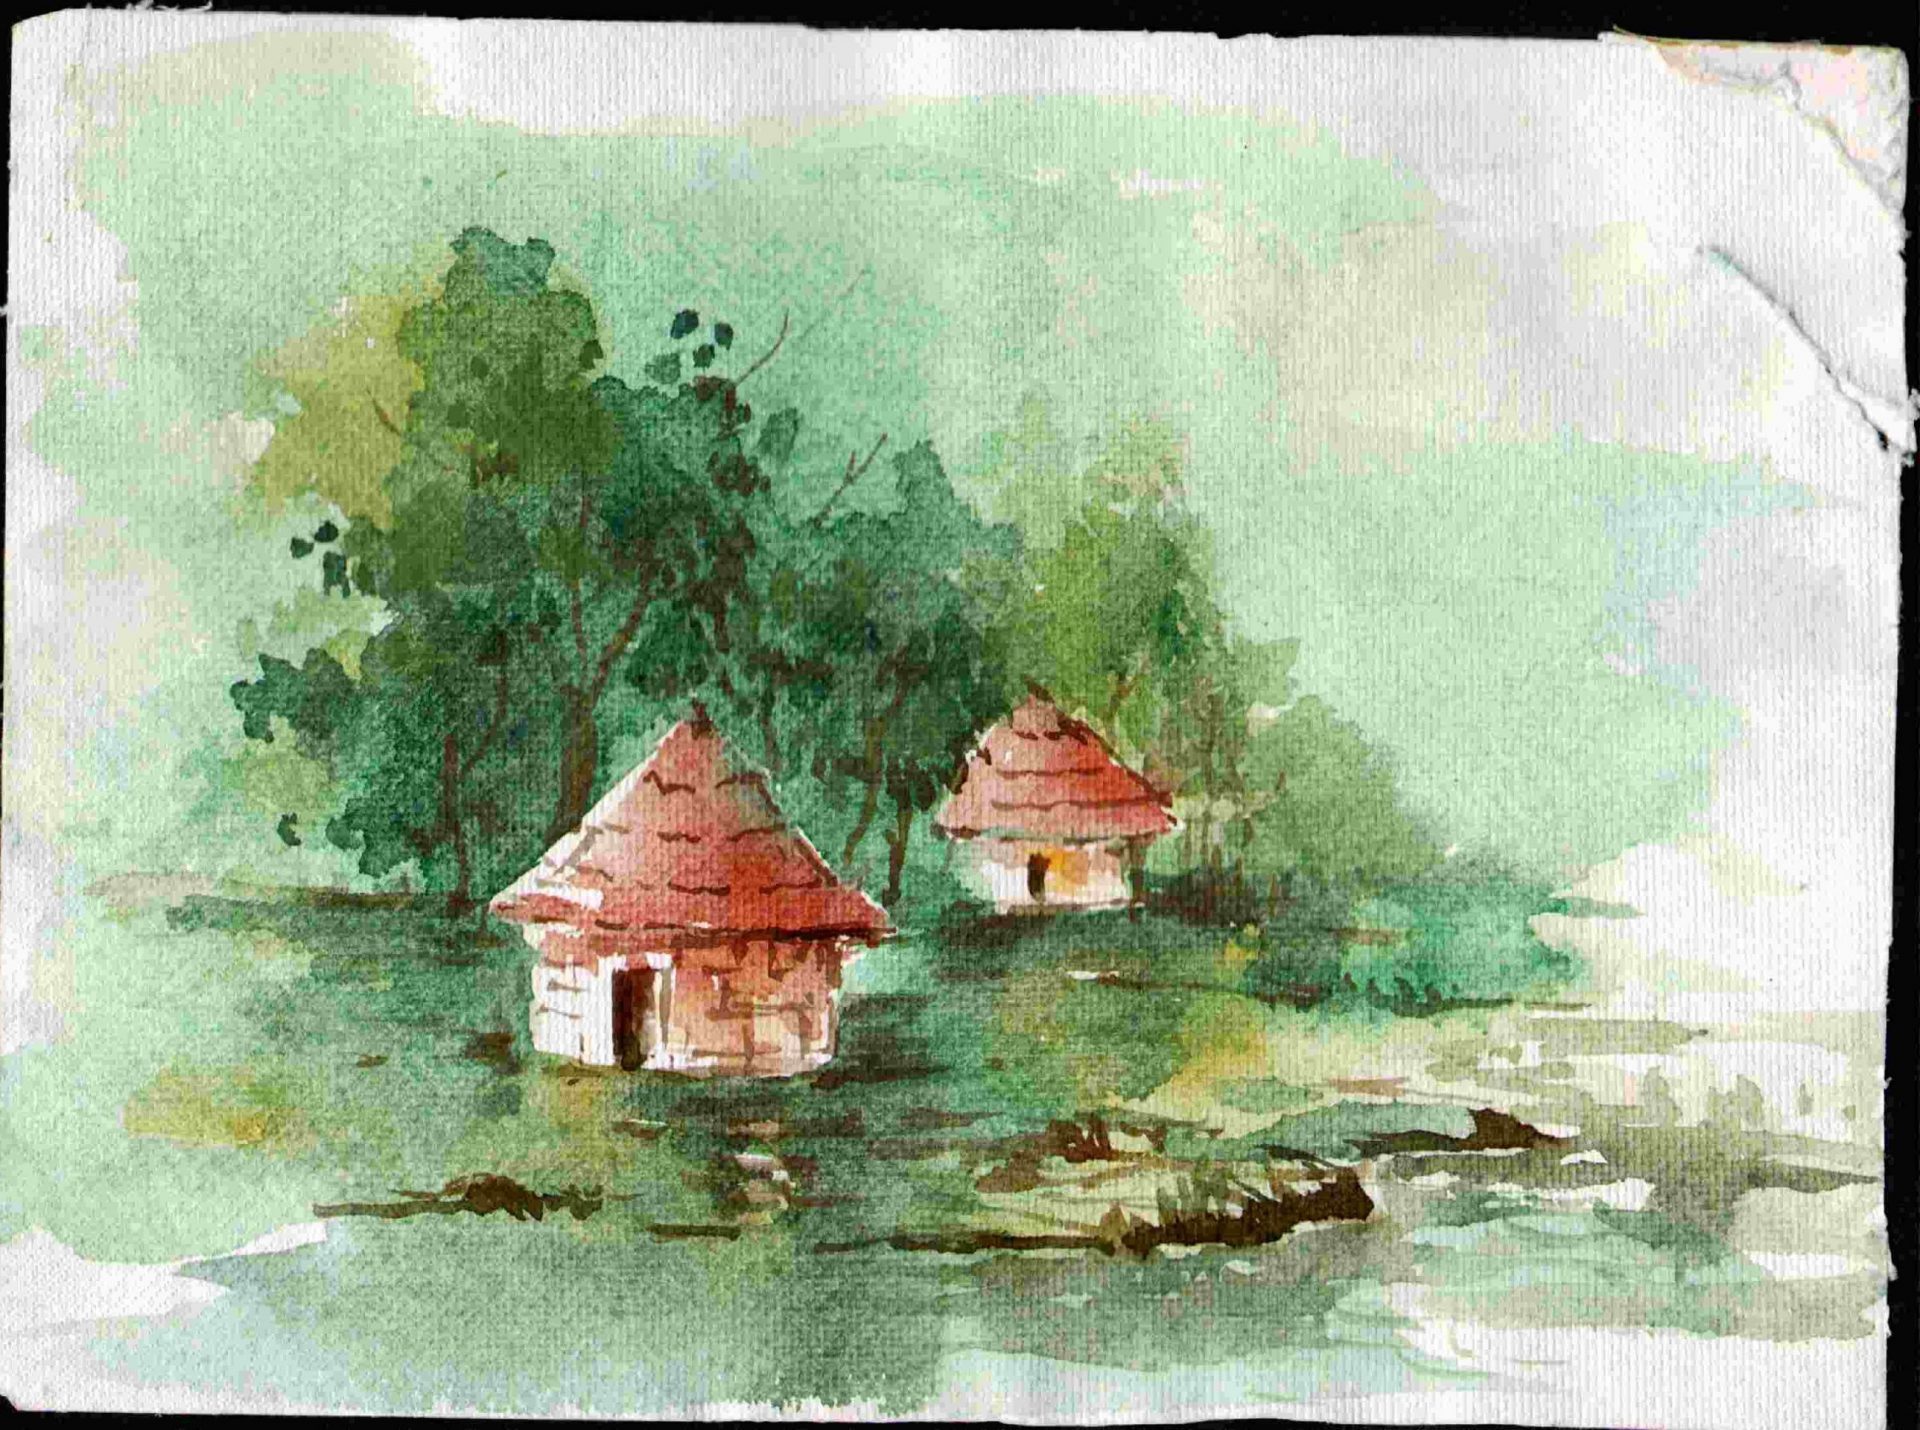 how to draw easy scenery drawing with oil pastel landscape village scenery  drawing step by step from prakitik sinari Watch Video  HiFiMovco